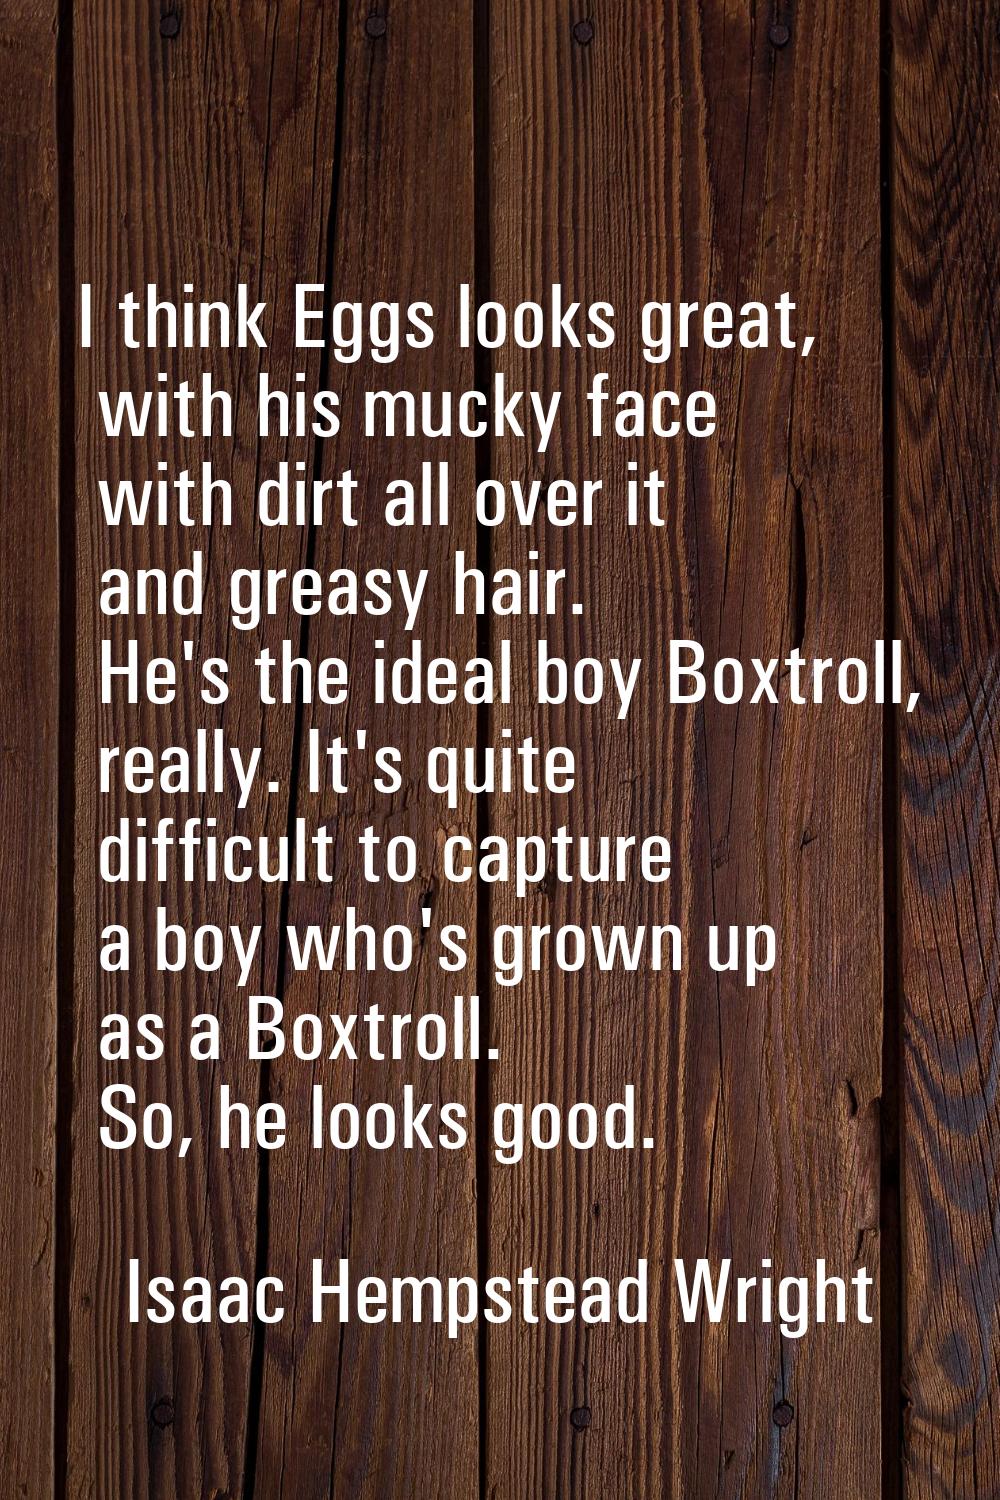 I think Eggs looks great, with his mucky face with dirt all over it and greasy hair. He's the ideal